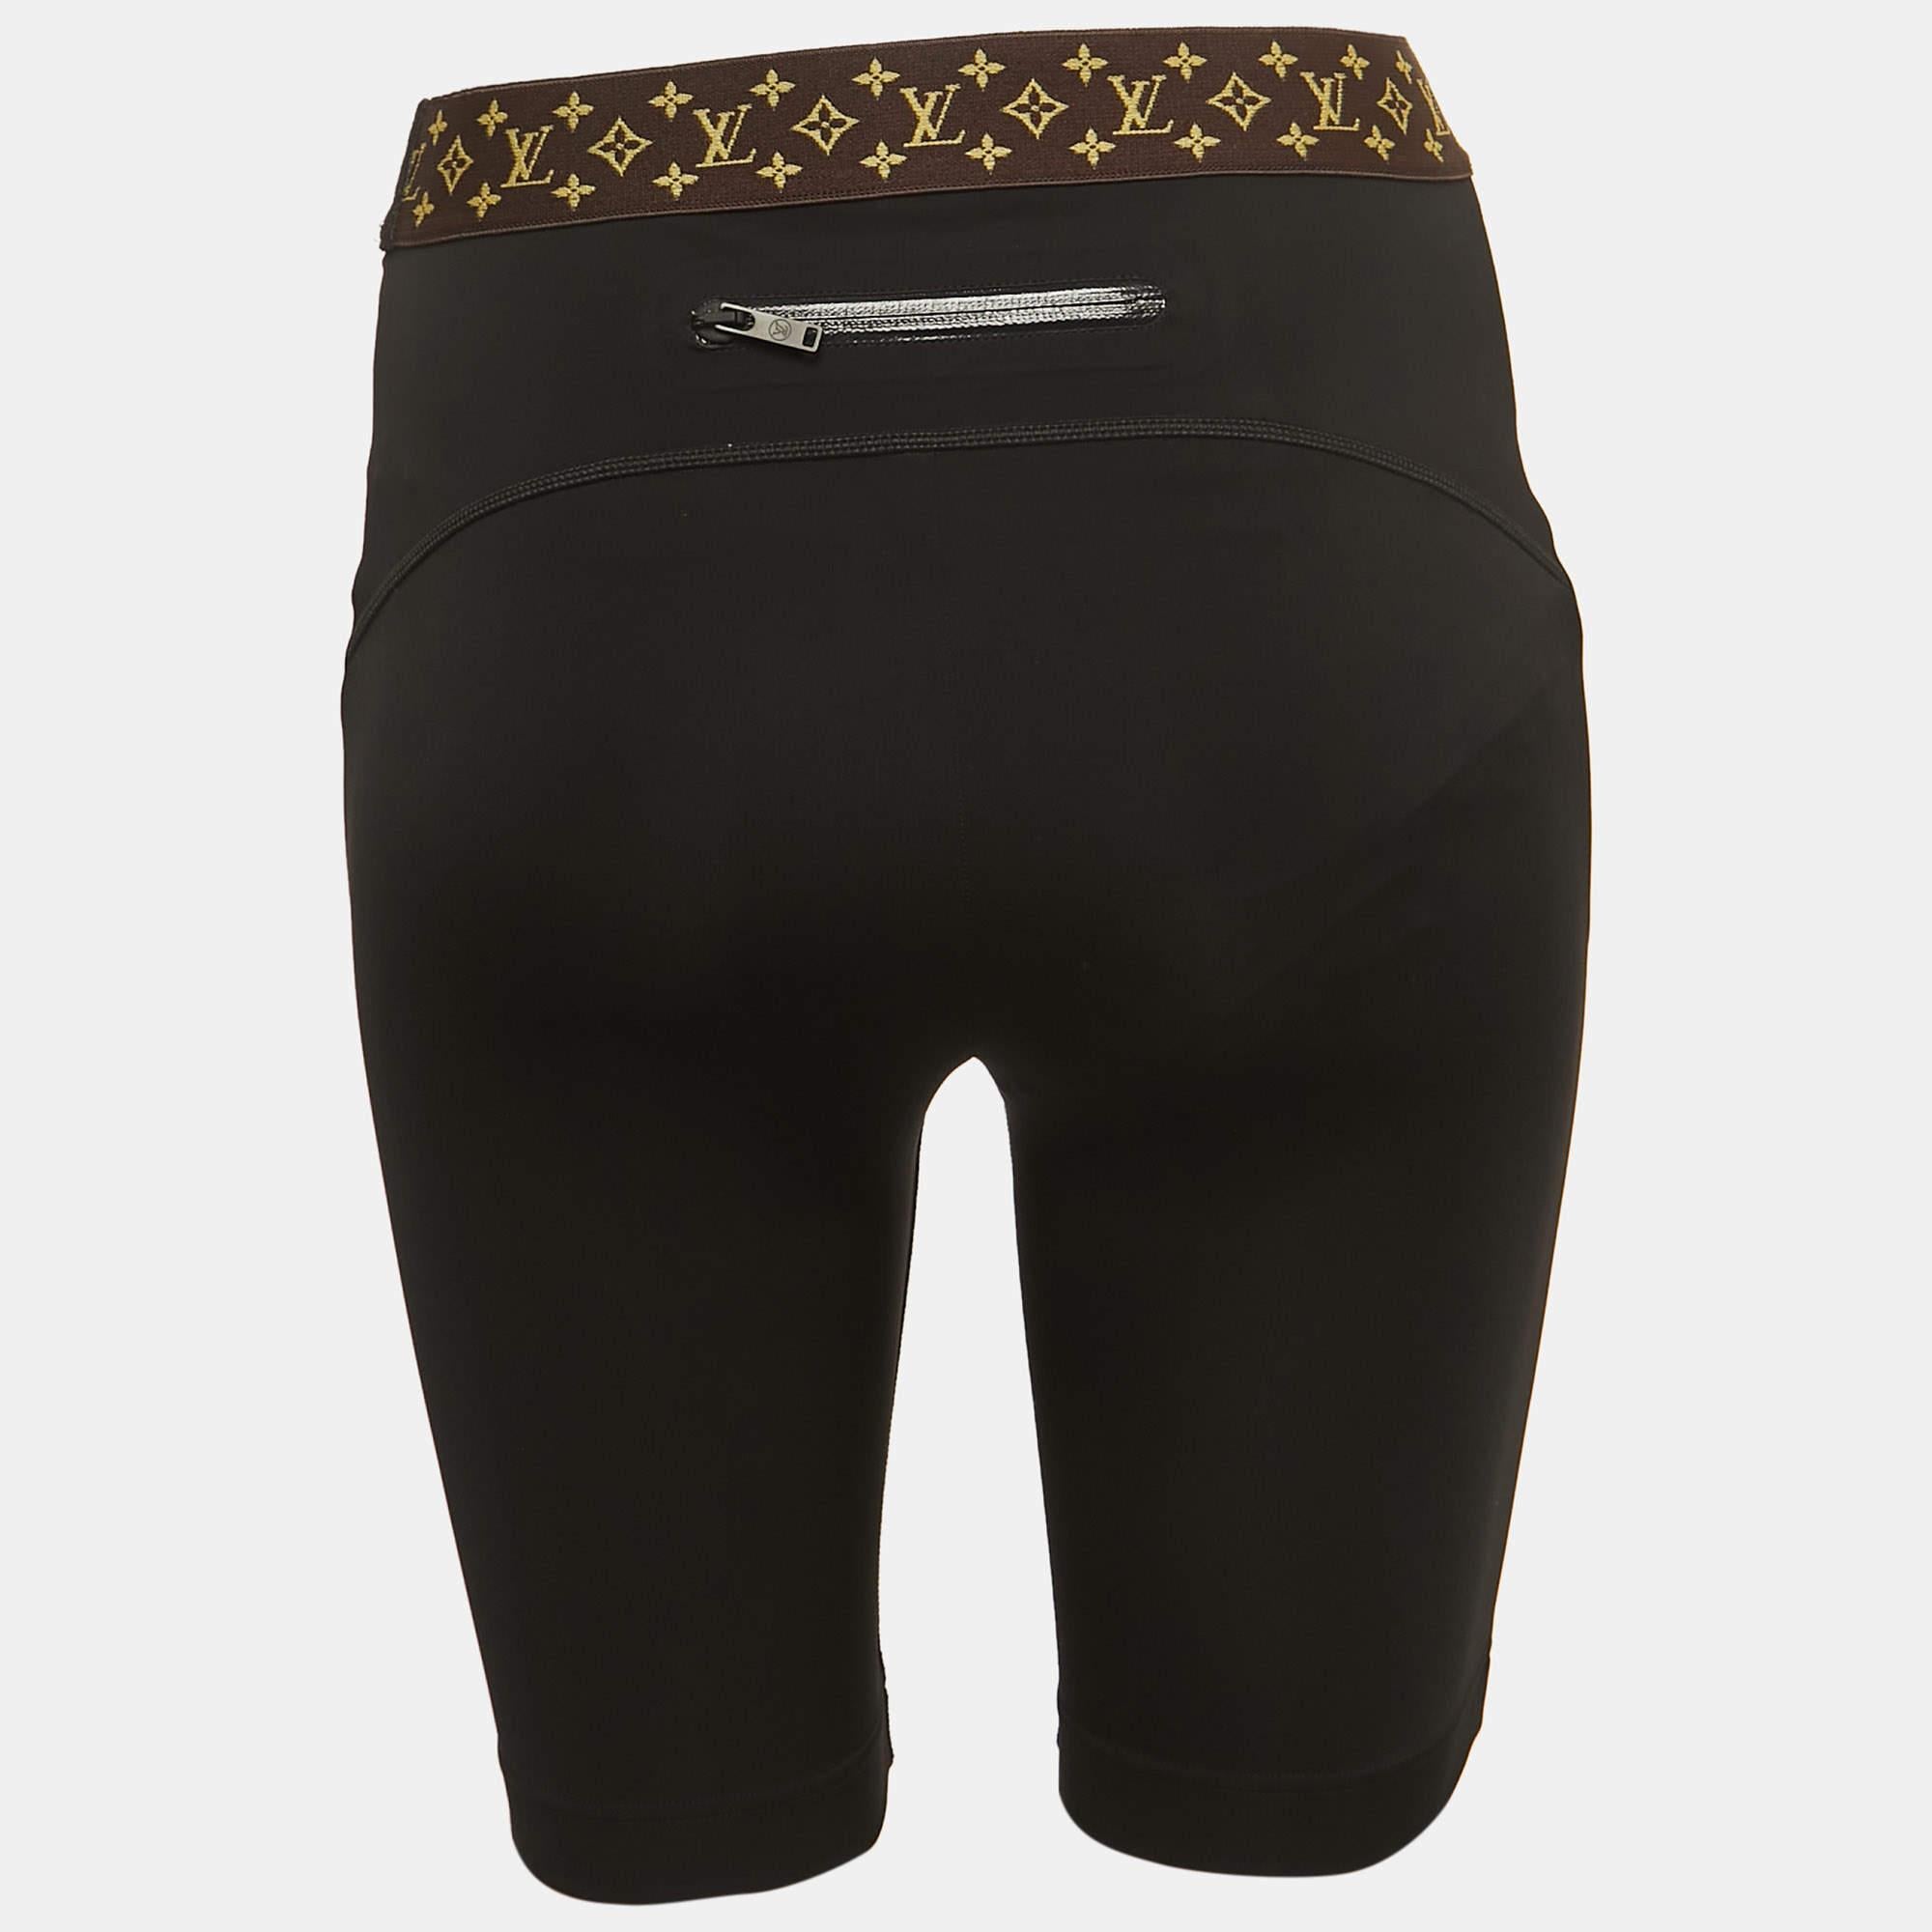 The Louis Vuitton cycling shorts are a high-fashion collaboration piece. They feature a sleek black design with the iconic LV monogram. These cycling shorts blend luxury fashion with sporty functionality, making them a stylish choice for active